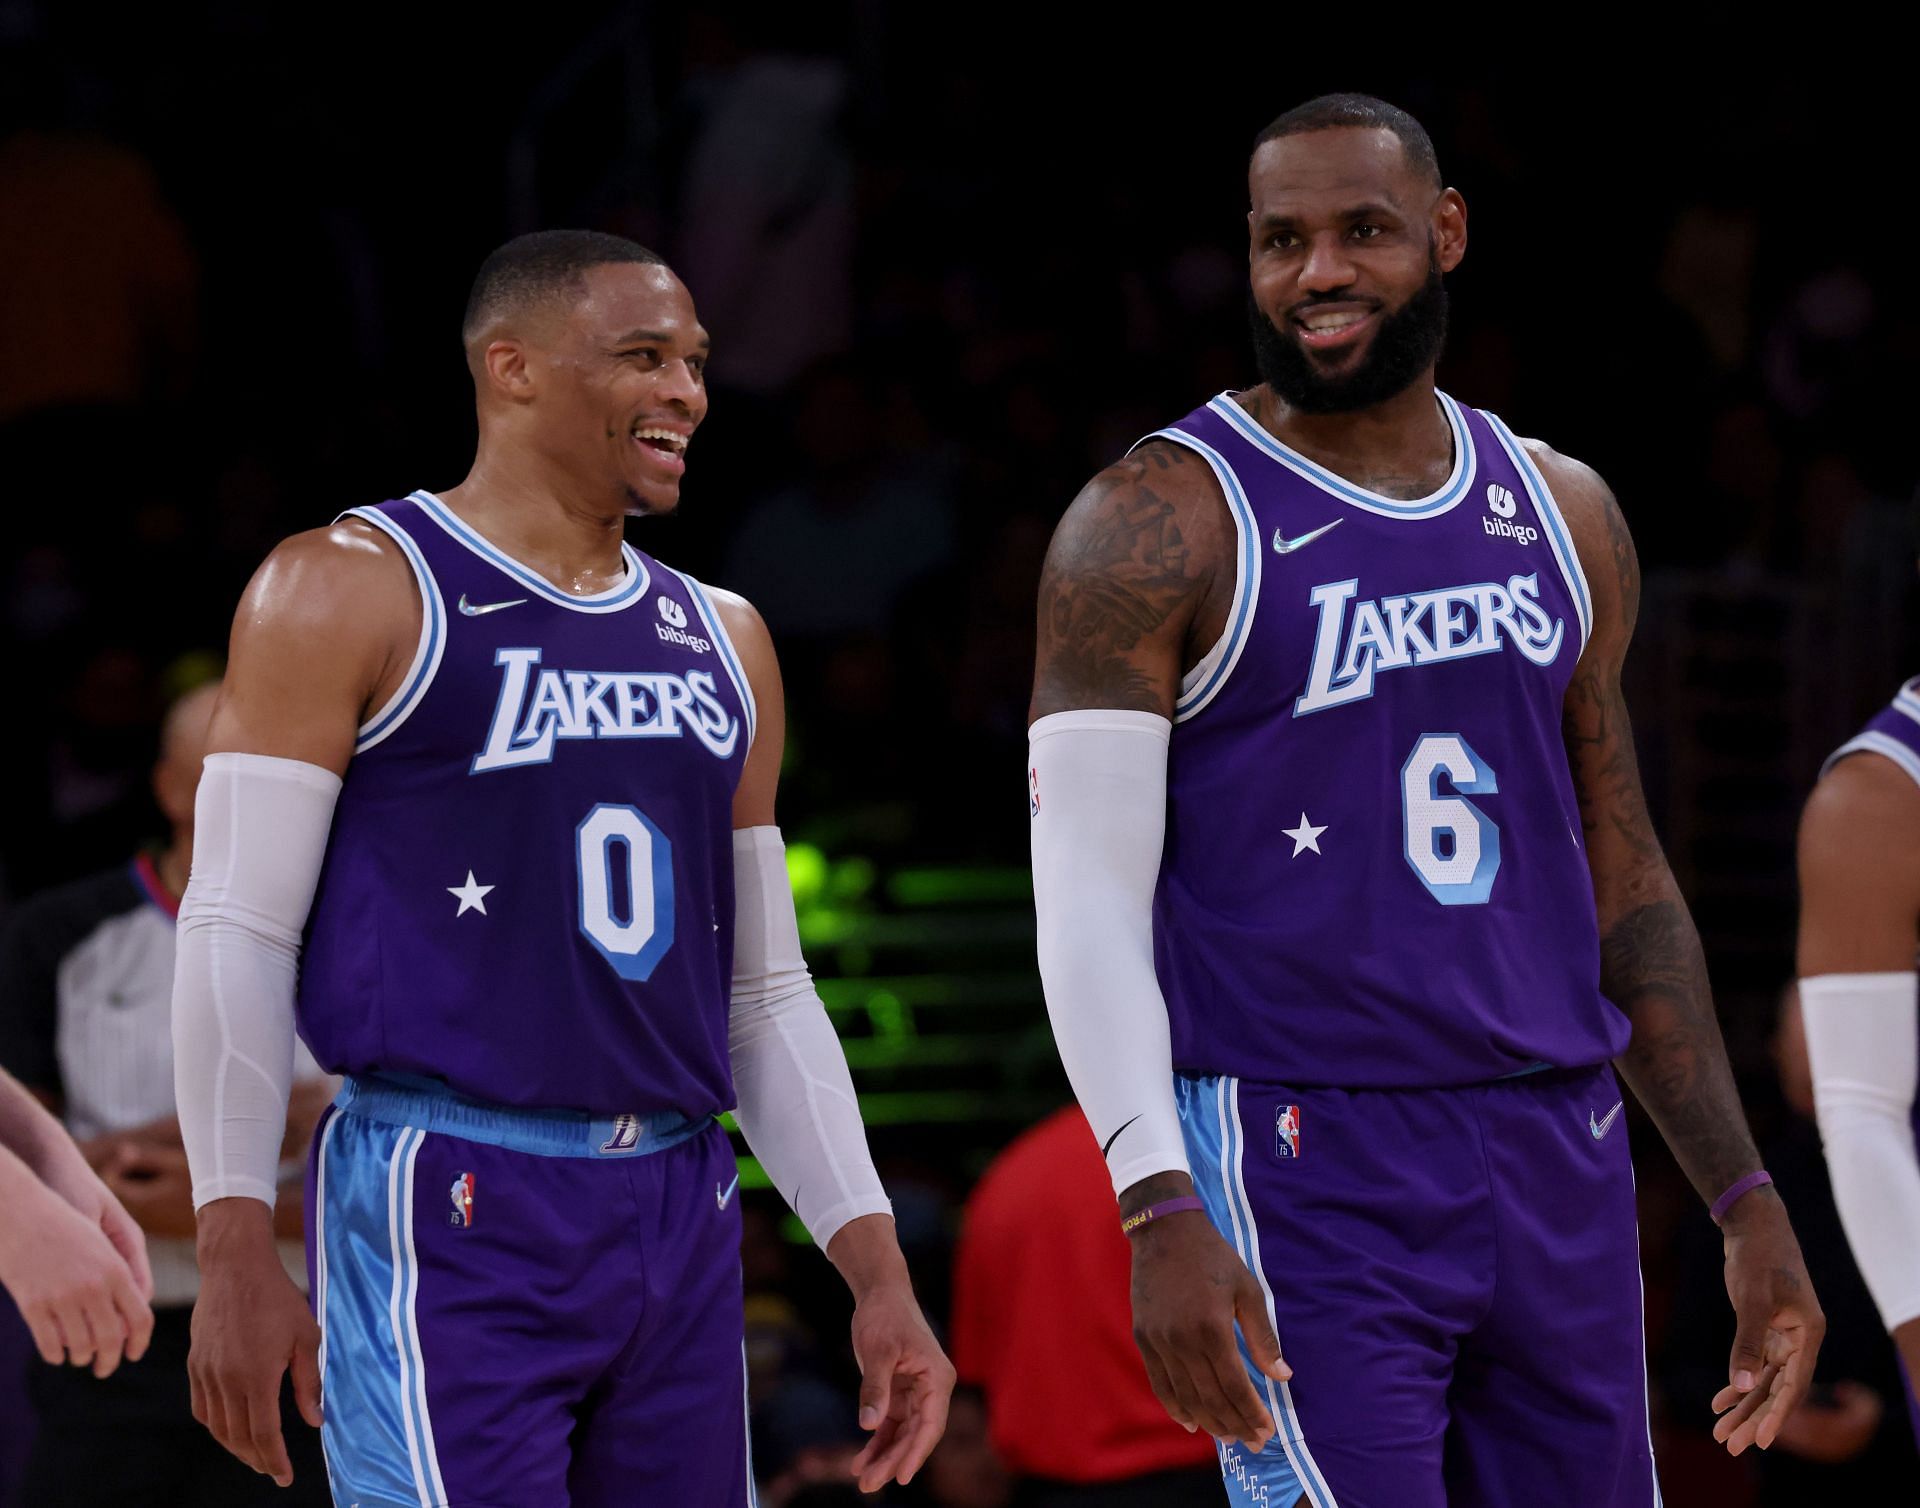 Los Angeles Lakers superstars Russell Westbrook and LeBron James